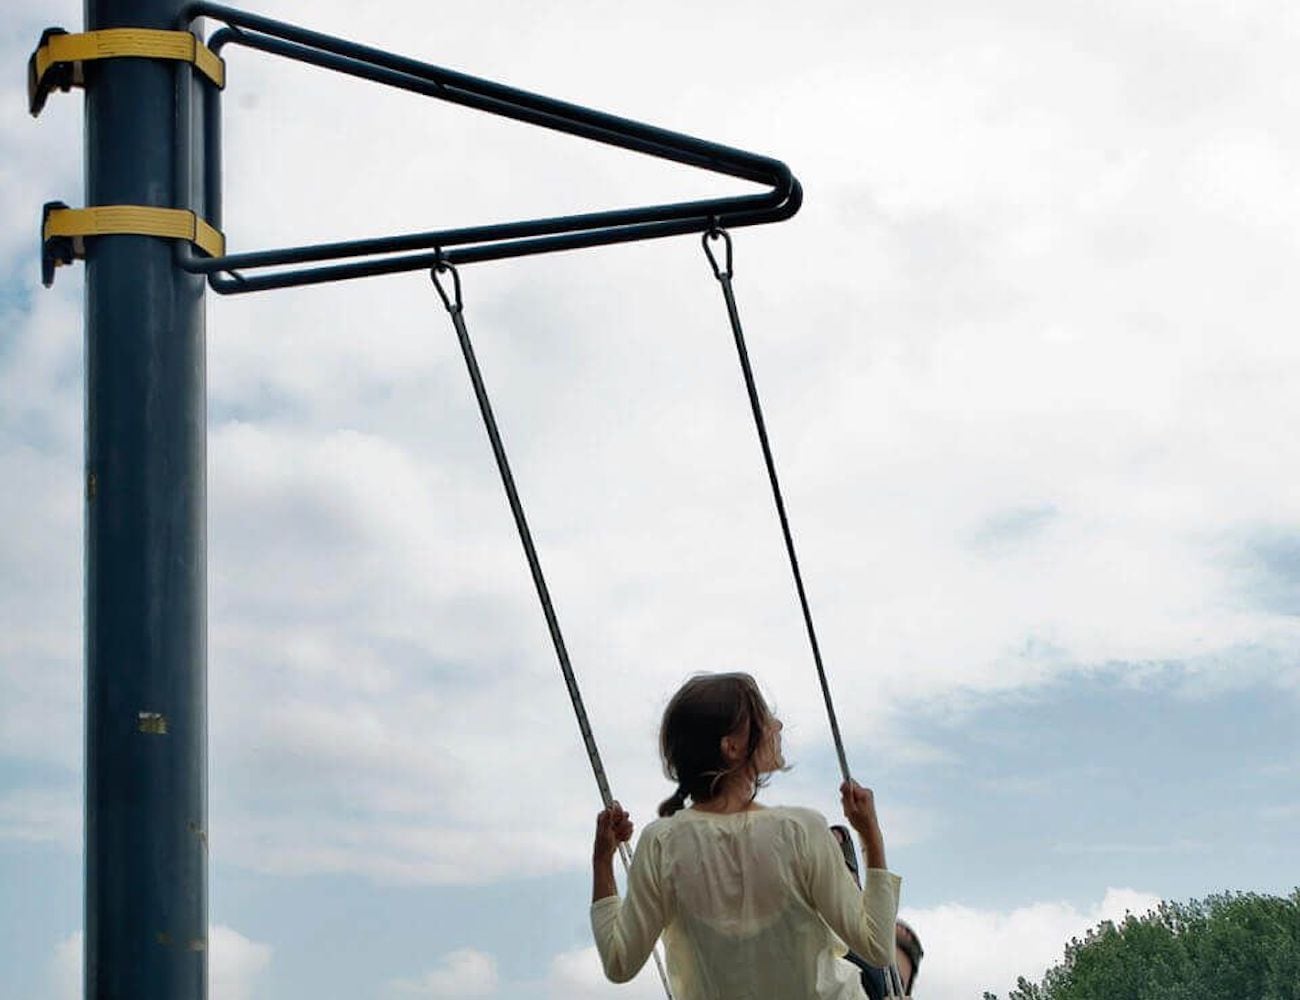 Weltevree Swing Mobile Anywhere Swing Set is fun for any age